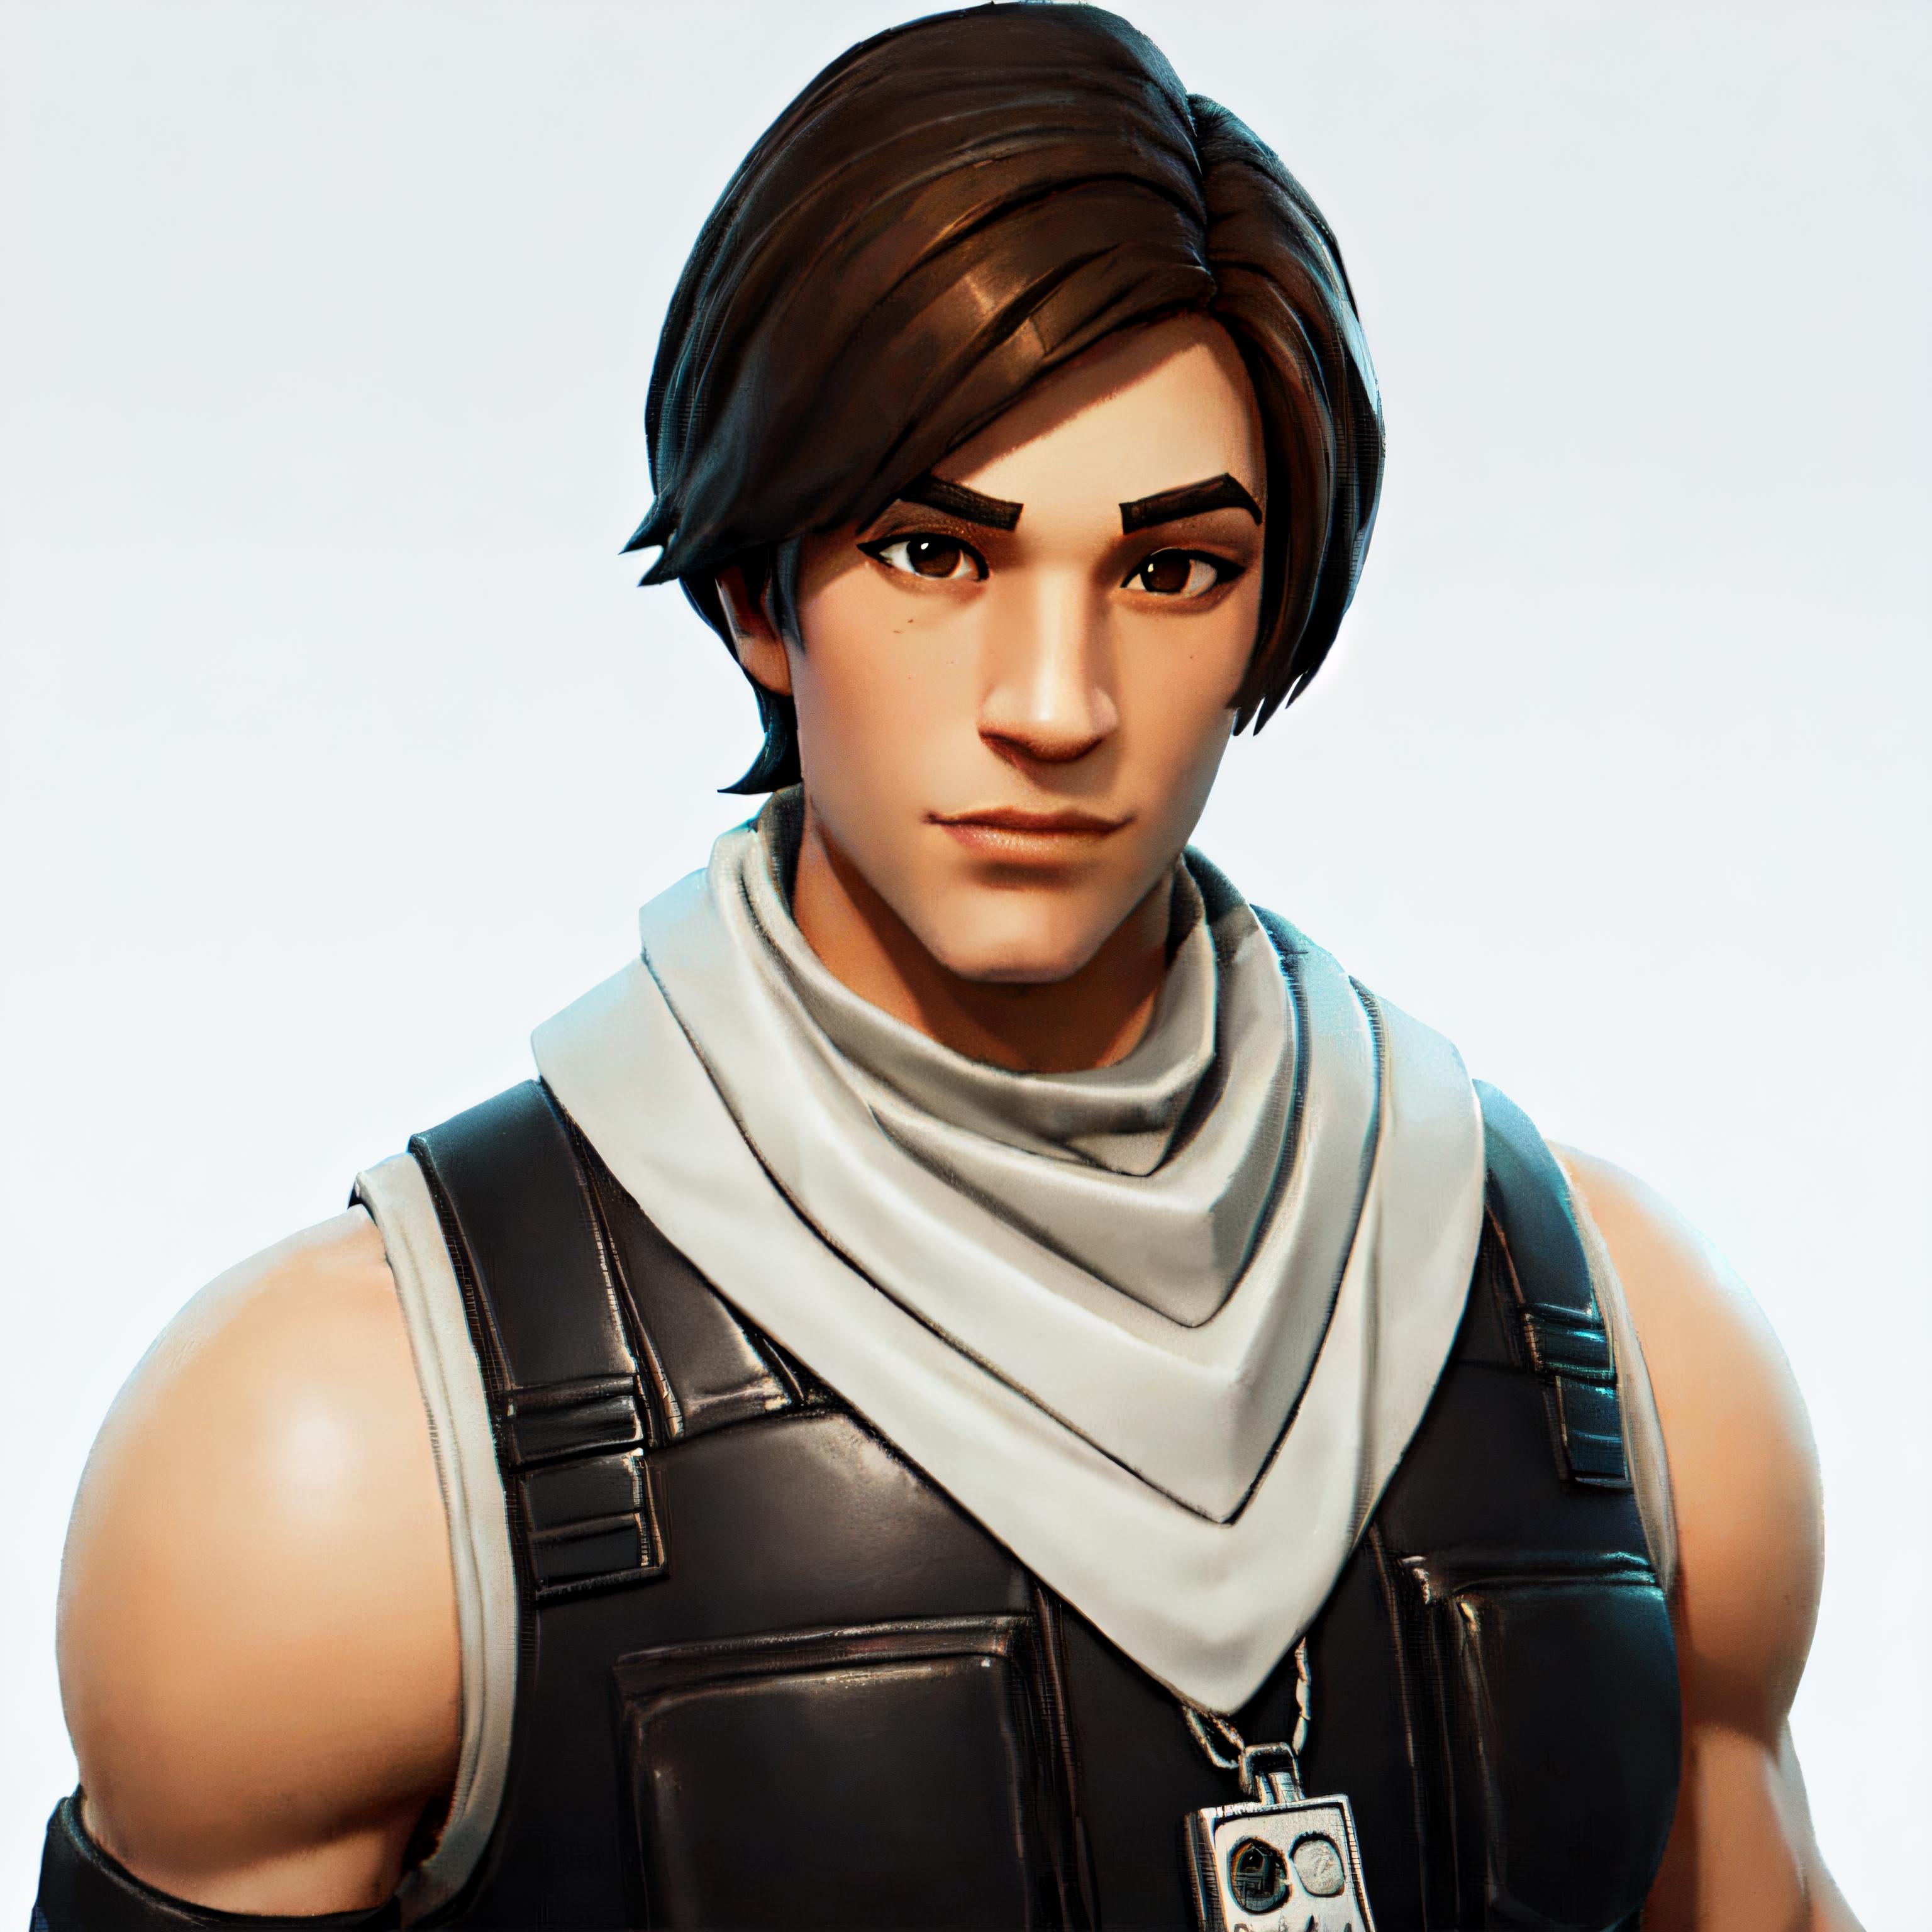 Fortnite - Ingame Style image by xikedi6435809